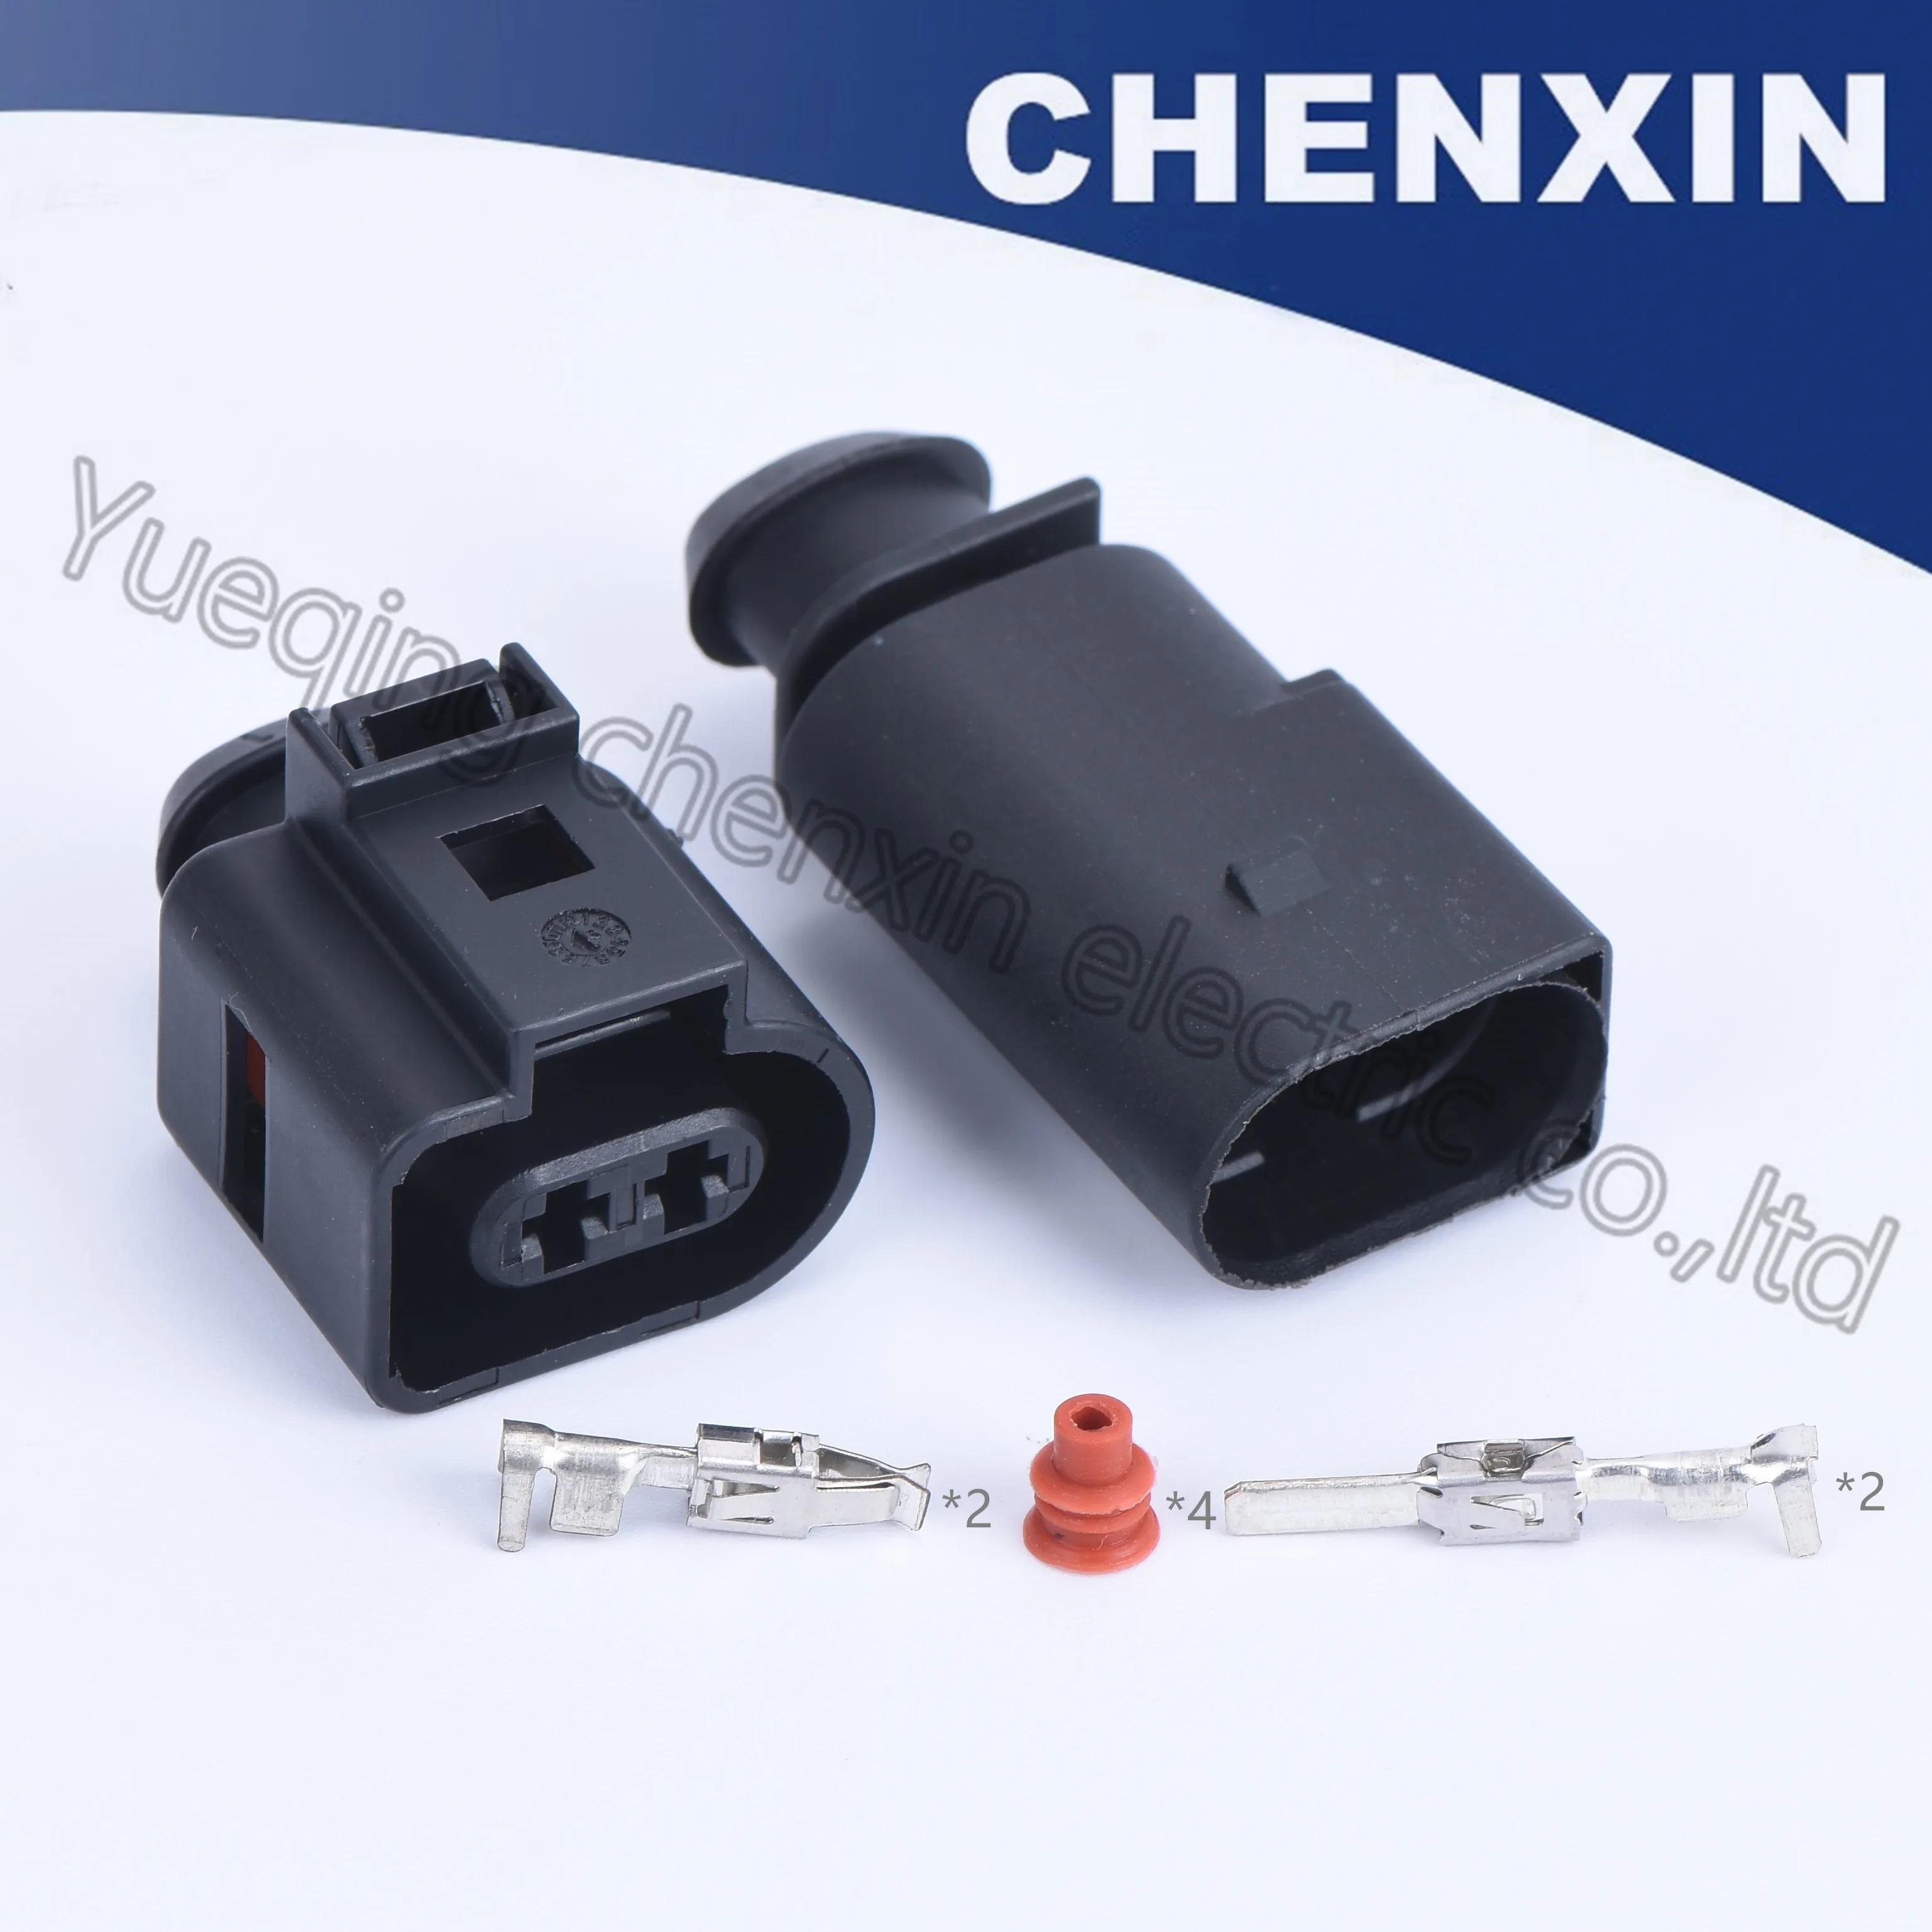 

Black 2pin car waterproof auto connector horn wire harness (3.5) male and female housing plug electrical sealed car wiring plug